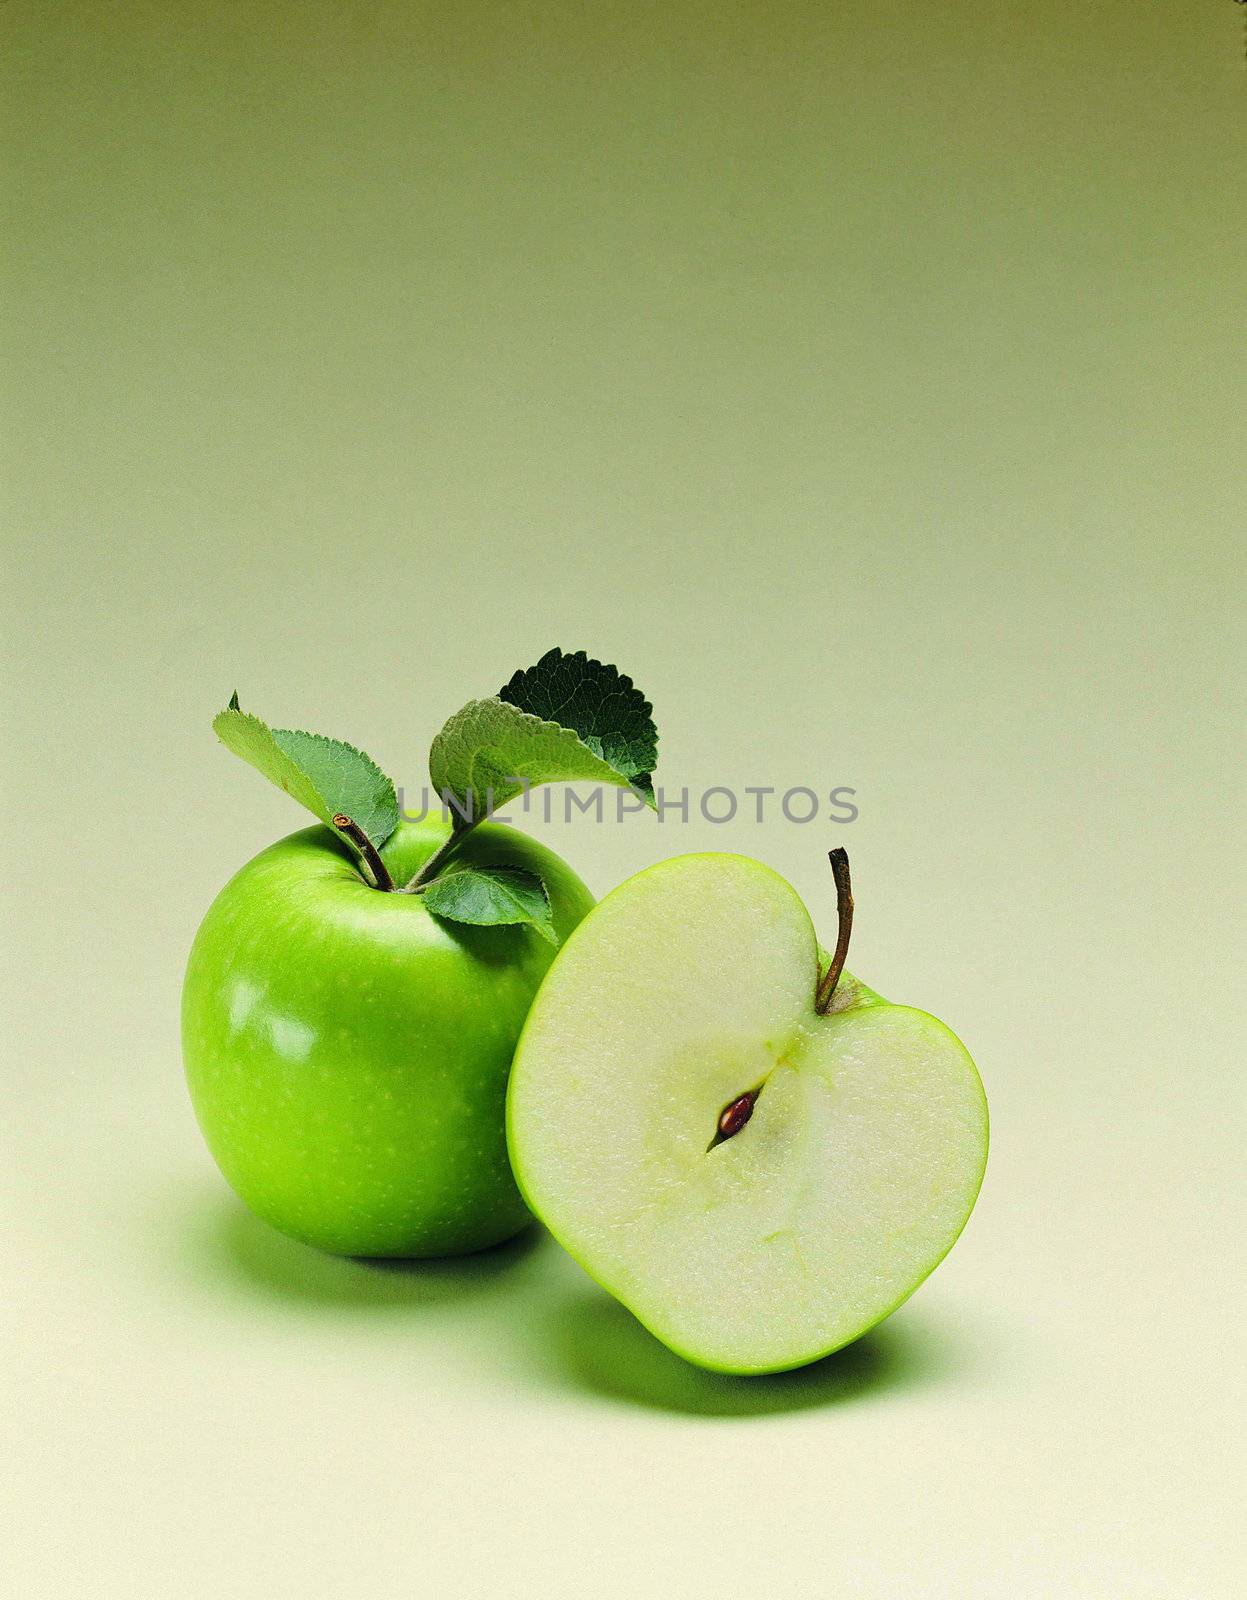 Ripe green apple with slices by Baltus